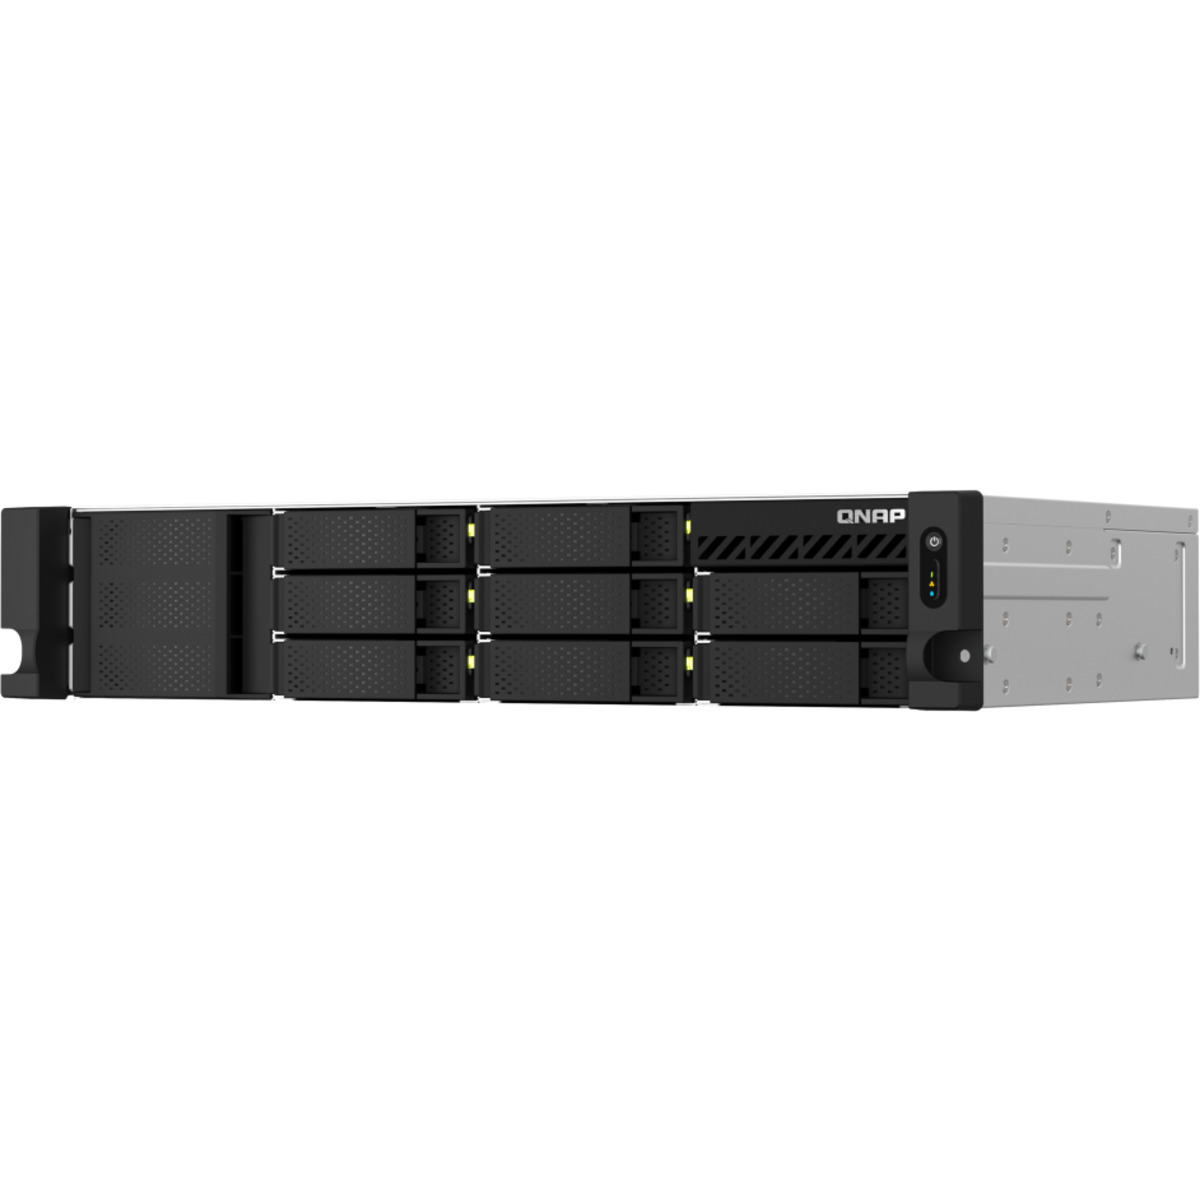 QNAP TS-864eU-RP 36tb 8-Bay RackMount Multimedia / Power User / Business NAS - Network Attached Storage Device 6x6tb Western Digital Red Pro WD6003FFBX 3.5 7200rpm SATA 6Gb/s HDD NAS Class Drives Installed - Burn-In Tested TS-864eU-RP